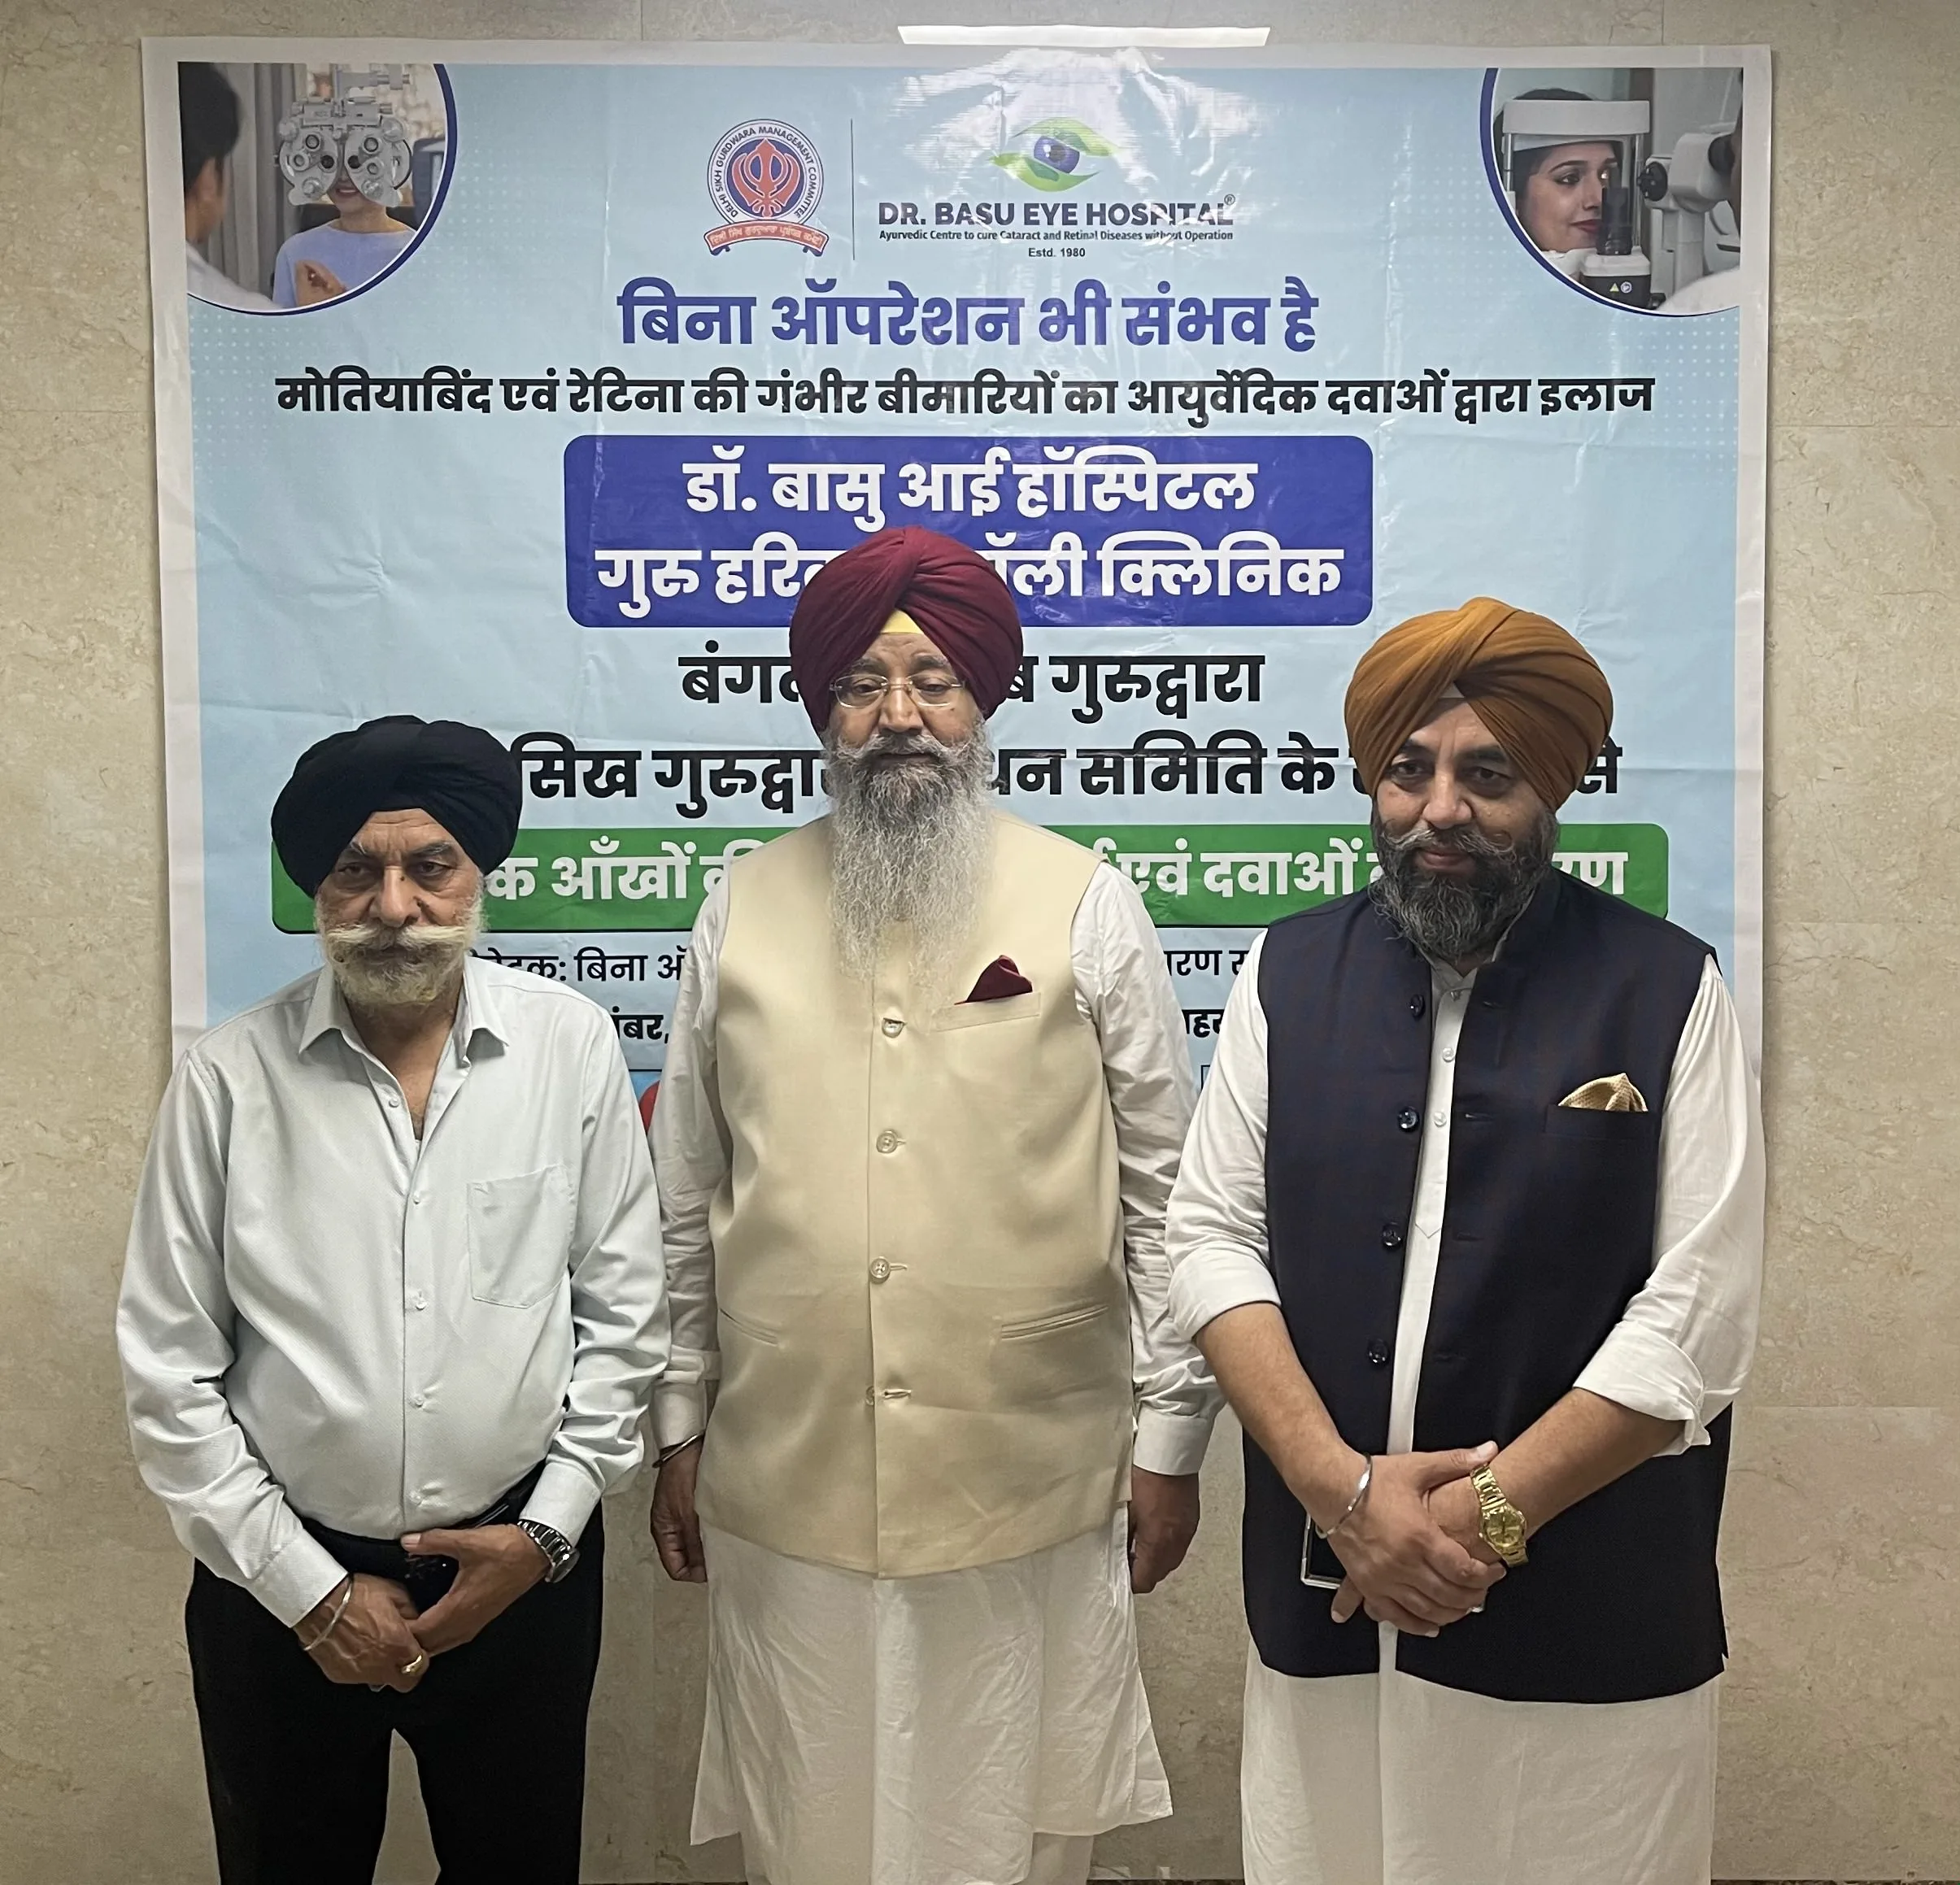 Dr. Basu Eye Hospital, a renowned name in the realm of Ayurvedic eye care, on the occasion of Prime Minister Narendra Modi’s birthday took a step towards holistic and accessible healthcare by organizing a free eye check-up camp at the revered Bangla Sahib Gurudwara in association with the Delhi Sikh Gurudwara Management Committee.